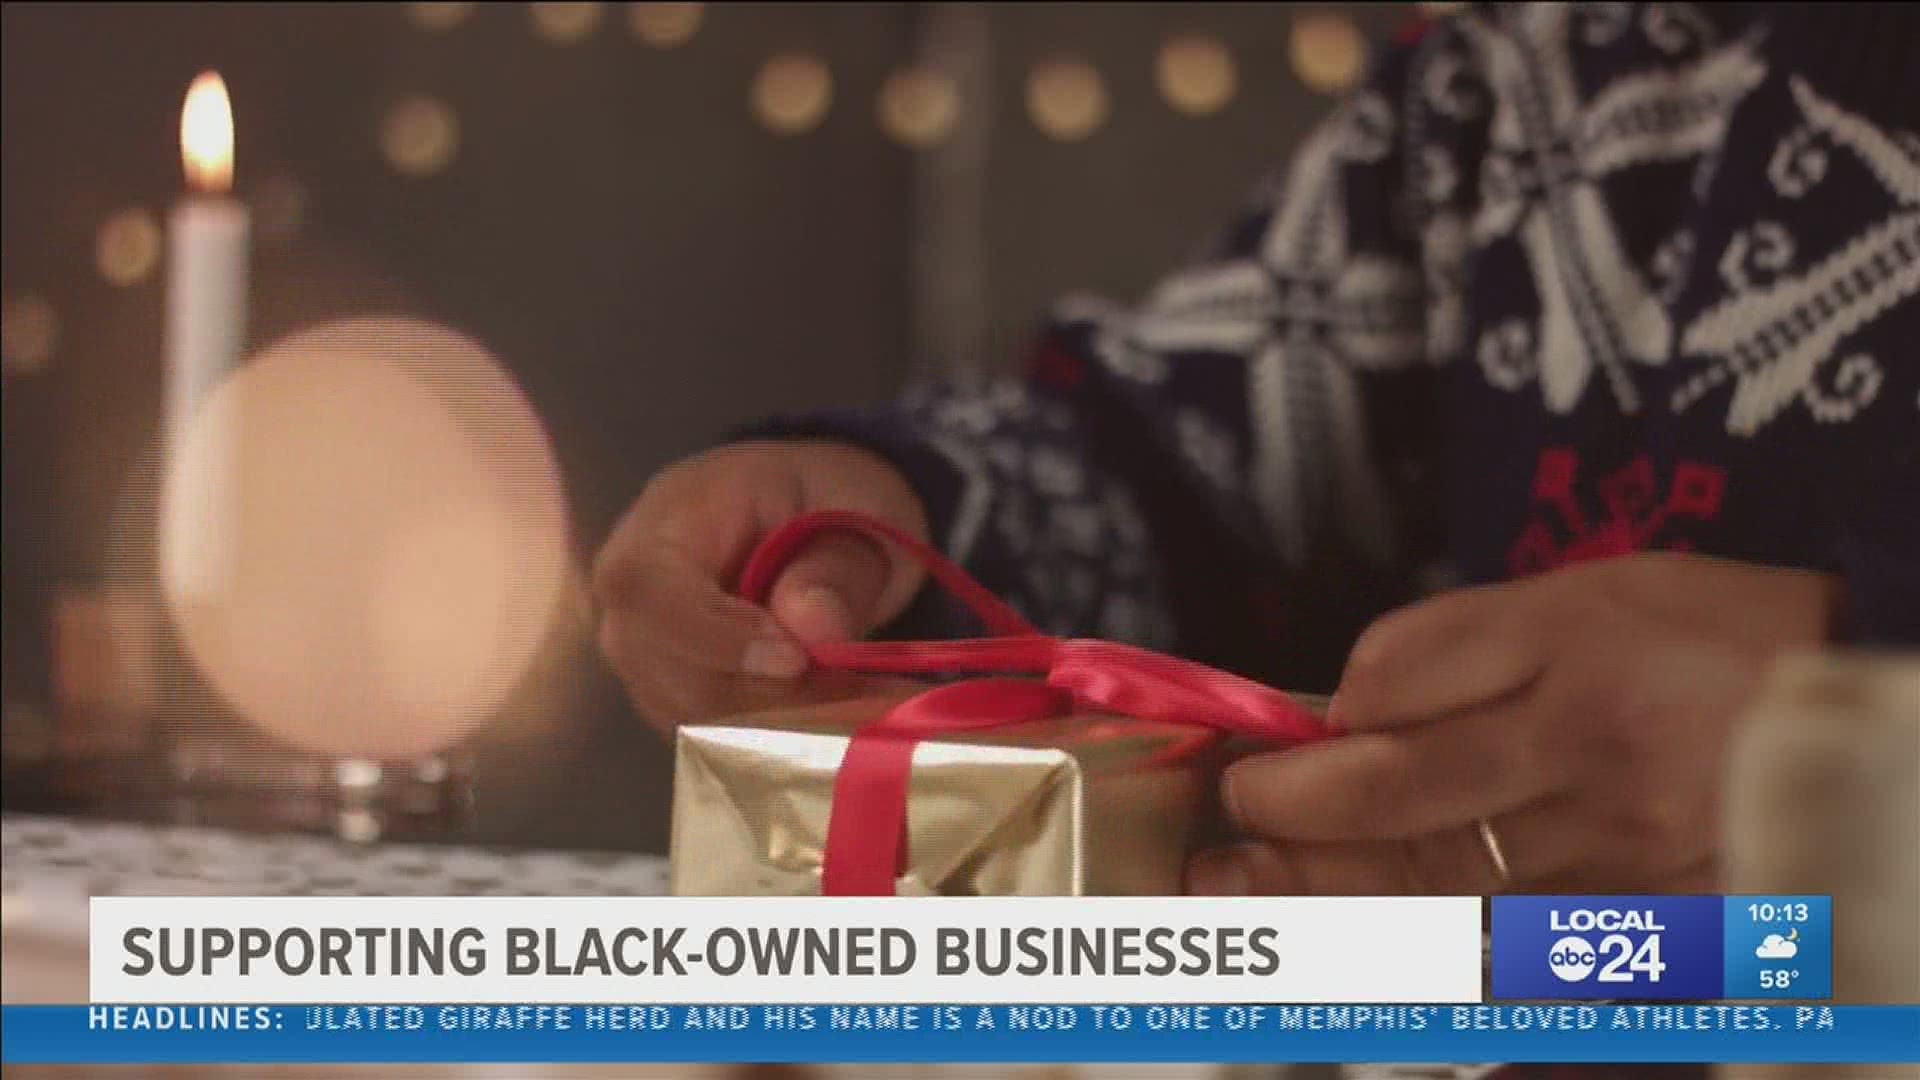 Facebook is teaming up with the U.S. Black Chamber of Commerce to feature more than 60 different small black-owned businesses and the products they sale.